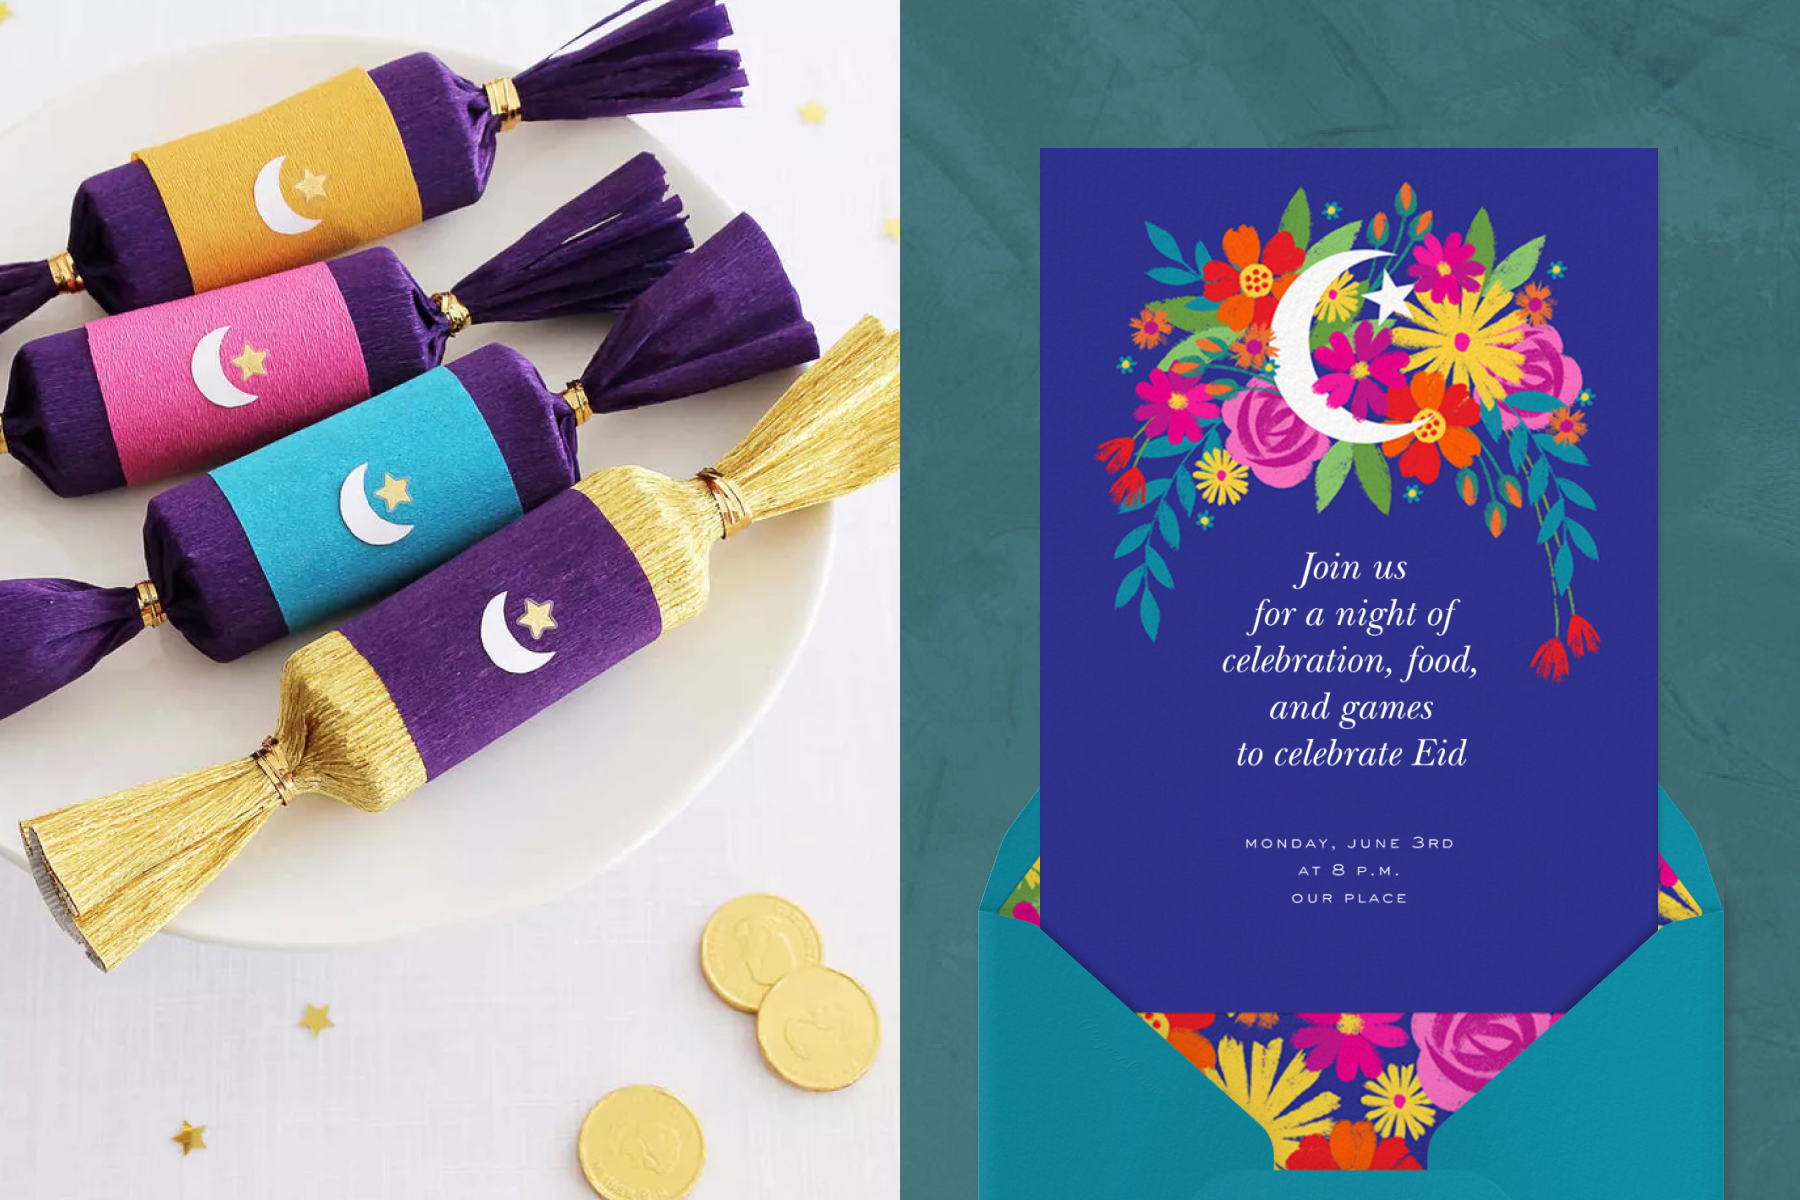 Left: Moon and star themed party poppers; right: an Eid party invitation featuring an illustration of a moon and star surrounded by bright flowers. It is paired with a matching teal envelope.